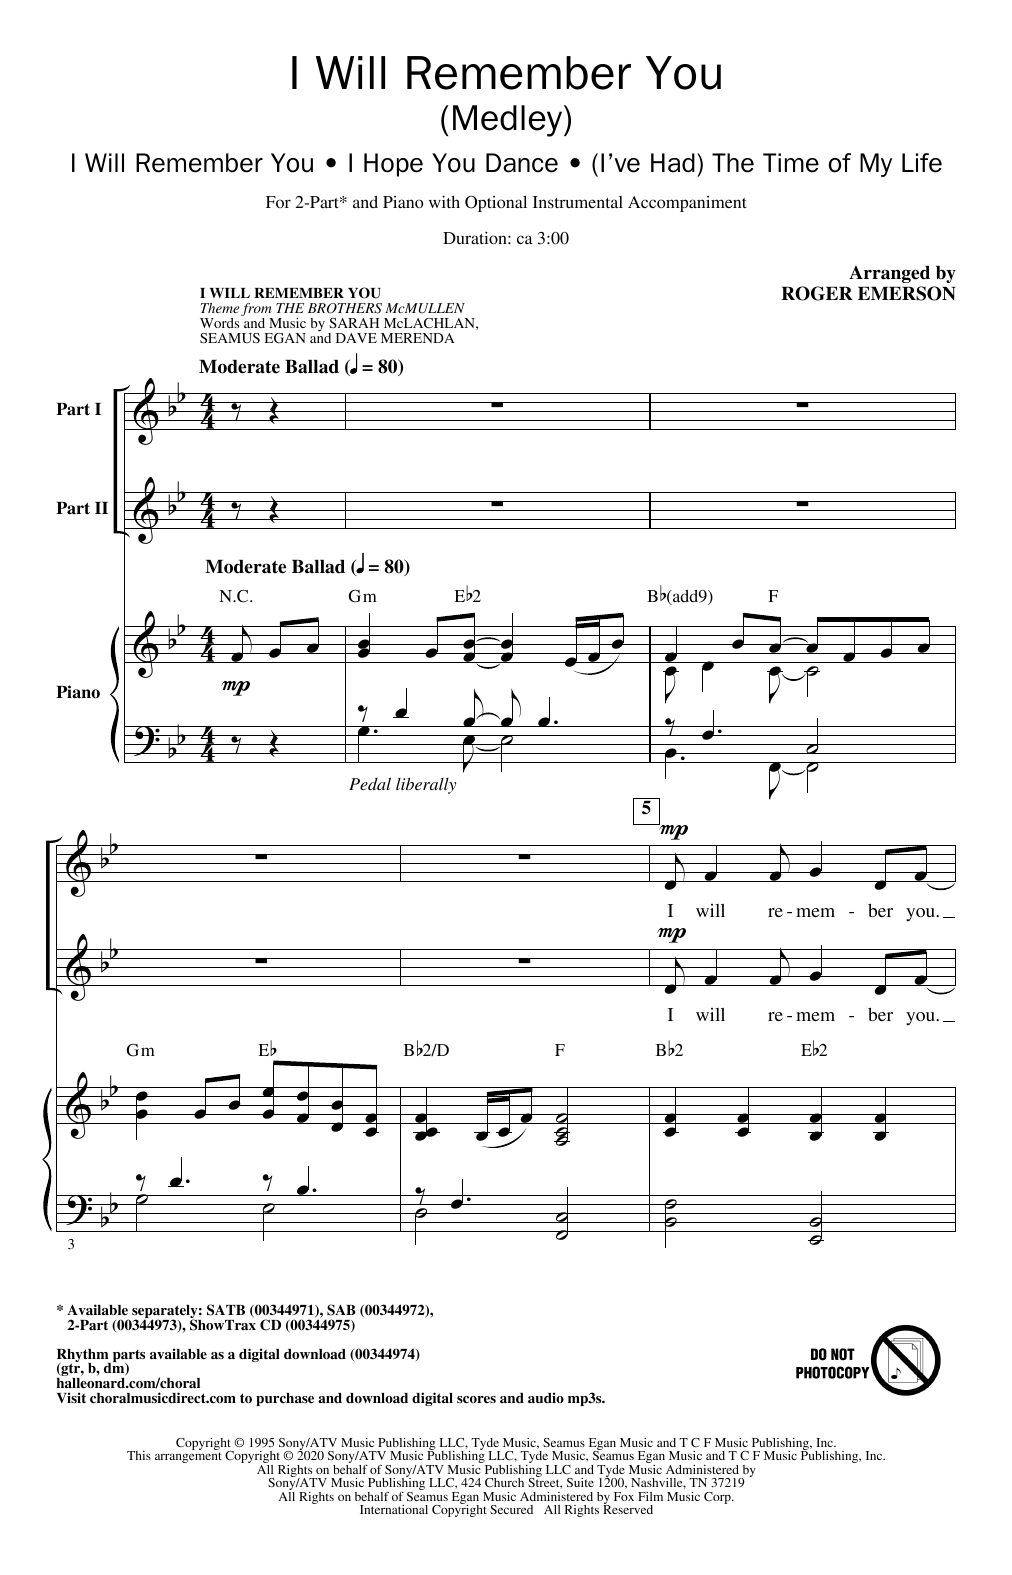 Download Roger Emerson I Will Remember You (Medley) Sheet Music